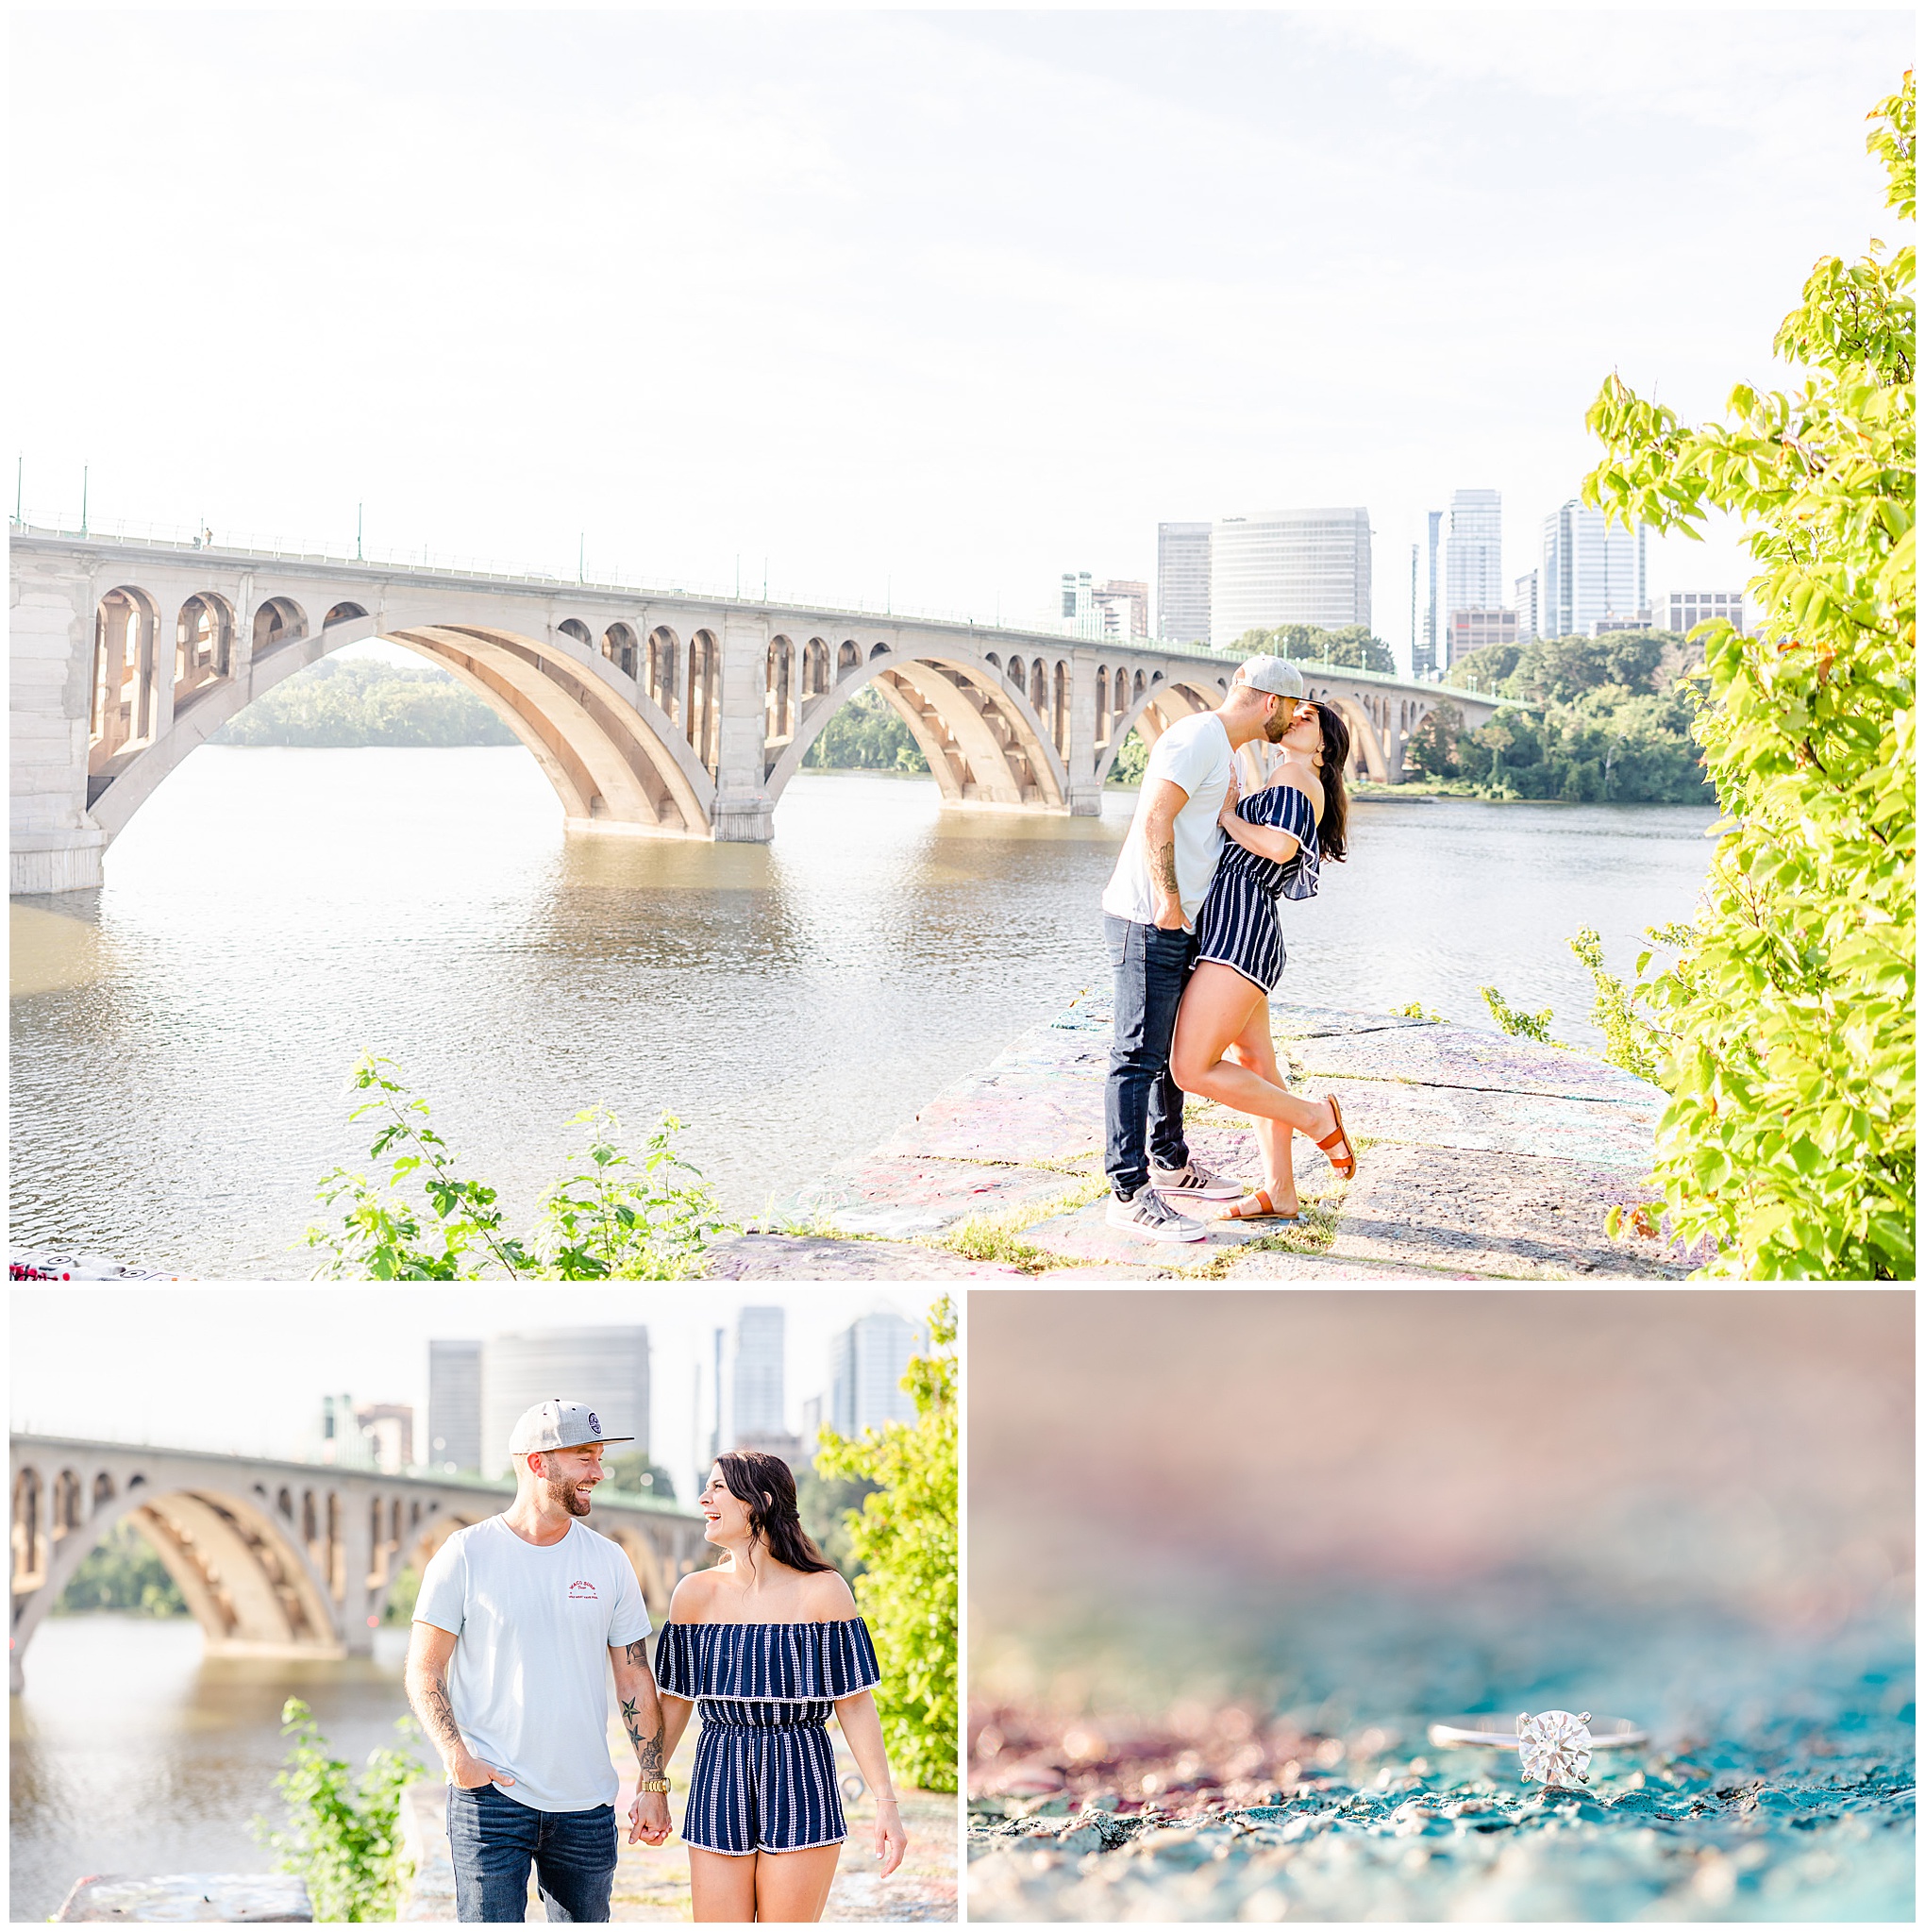 Georgetown waterfront engagement session, Georgetown engagement photos, Georgetown wedding photographer, DC wedding photographer, waterfront engagement photos, Georgetown waterfront engagement photos, DC engagement photos, Rachel E.H. Photography, summer engagement photos, couple kissing in front of bridge, engagement ring on graffiti 